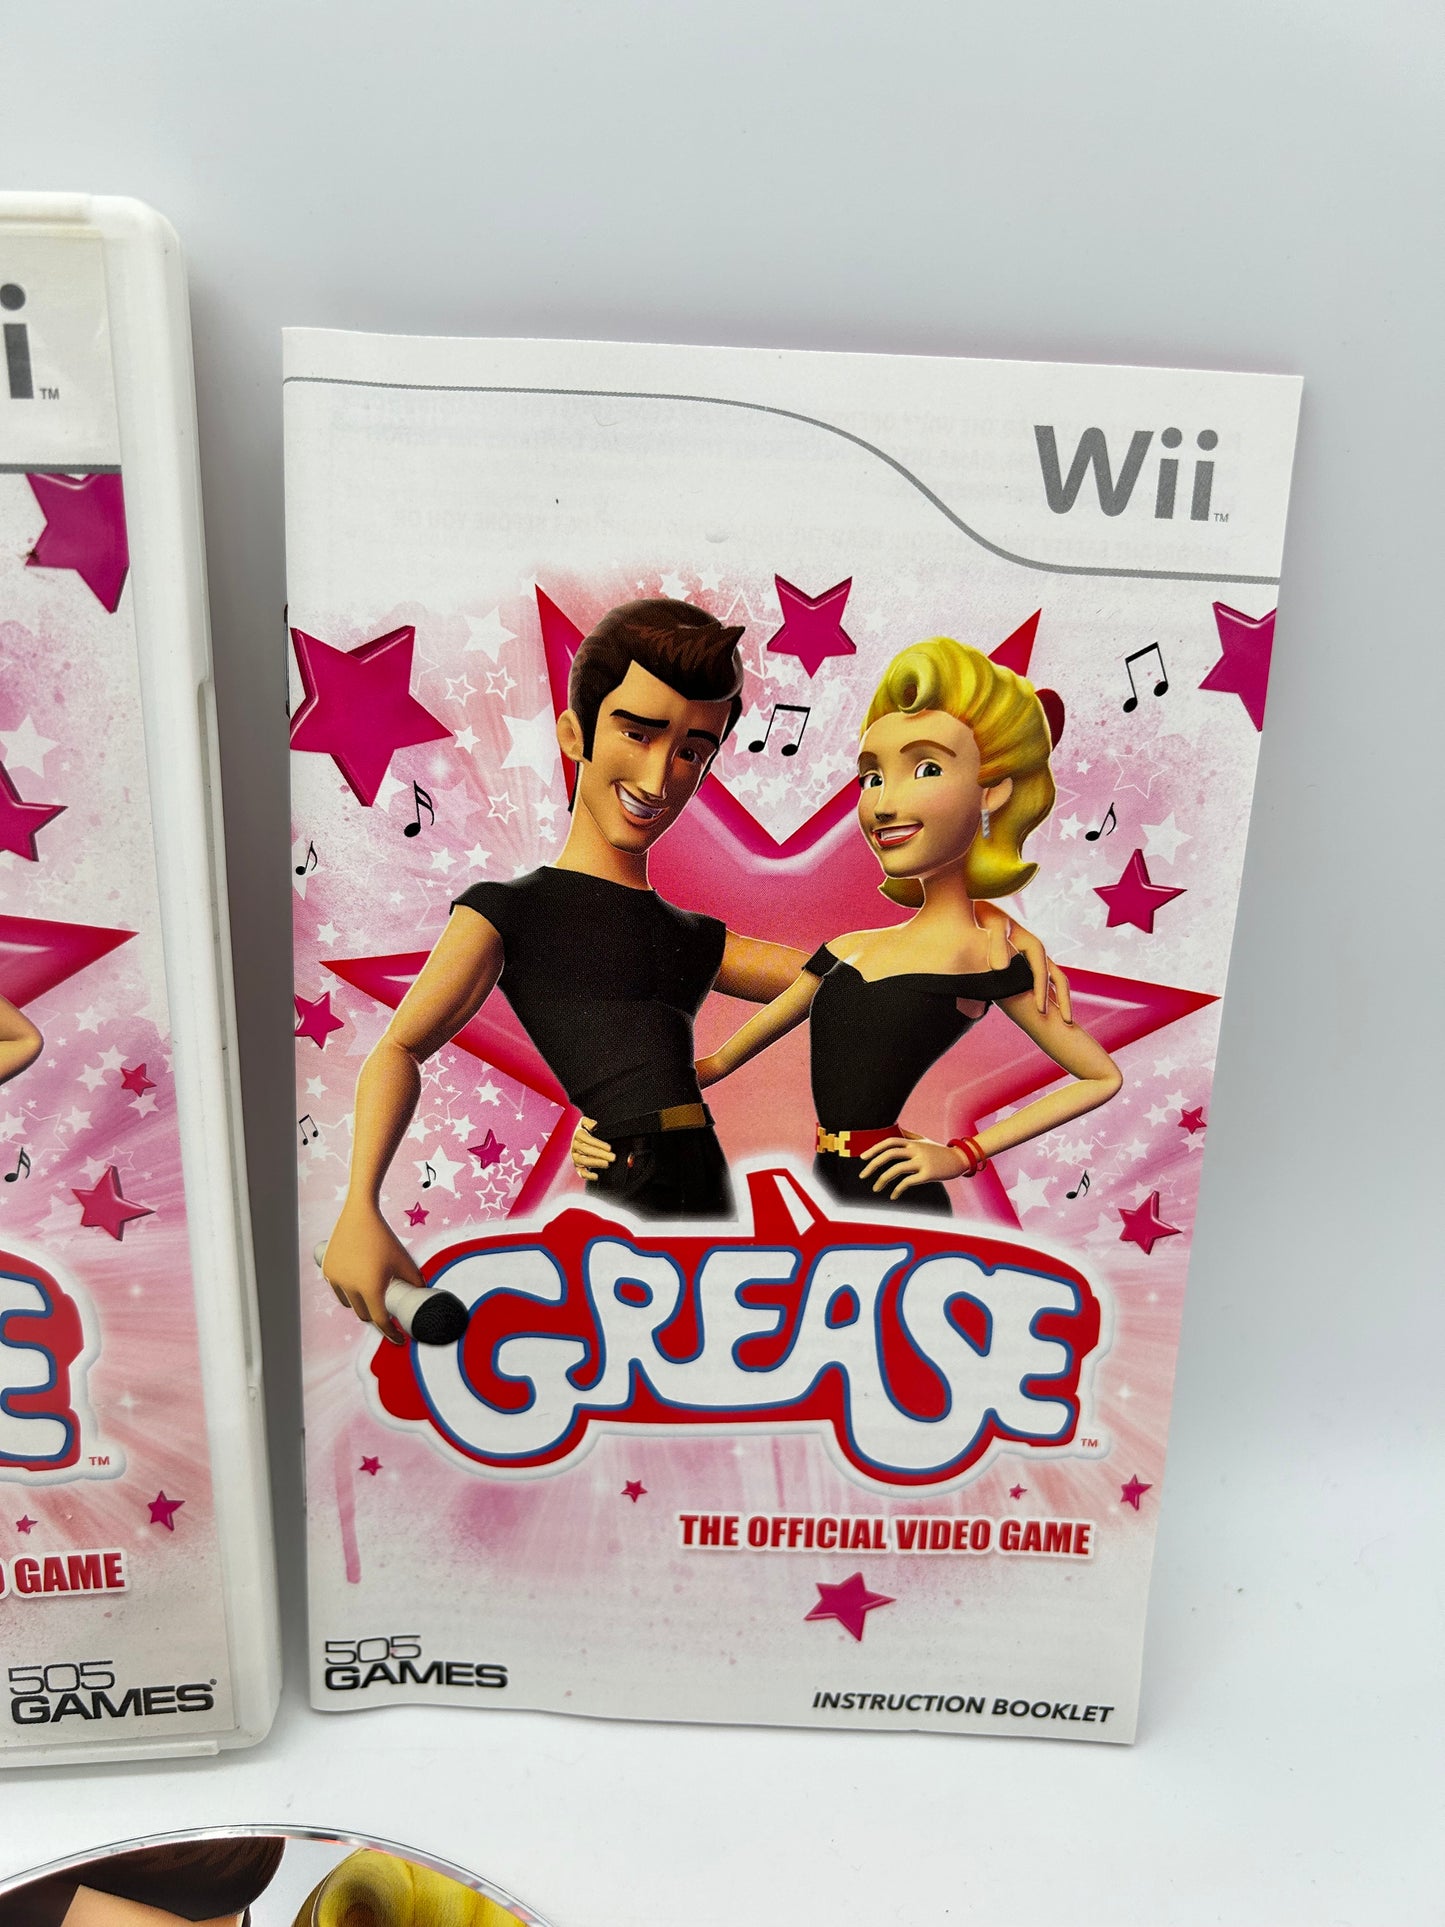 NiNTENDO Wii | GREASE THE OFFiCiAL VIDEO GAME